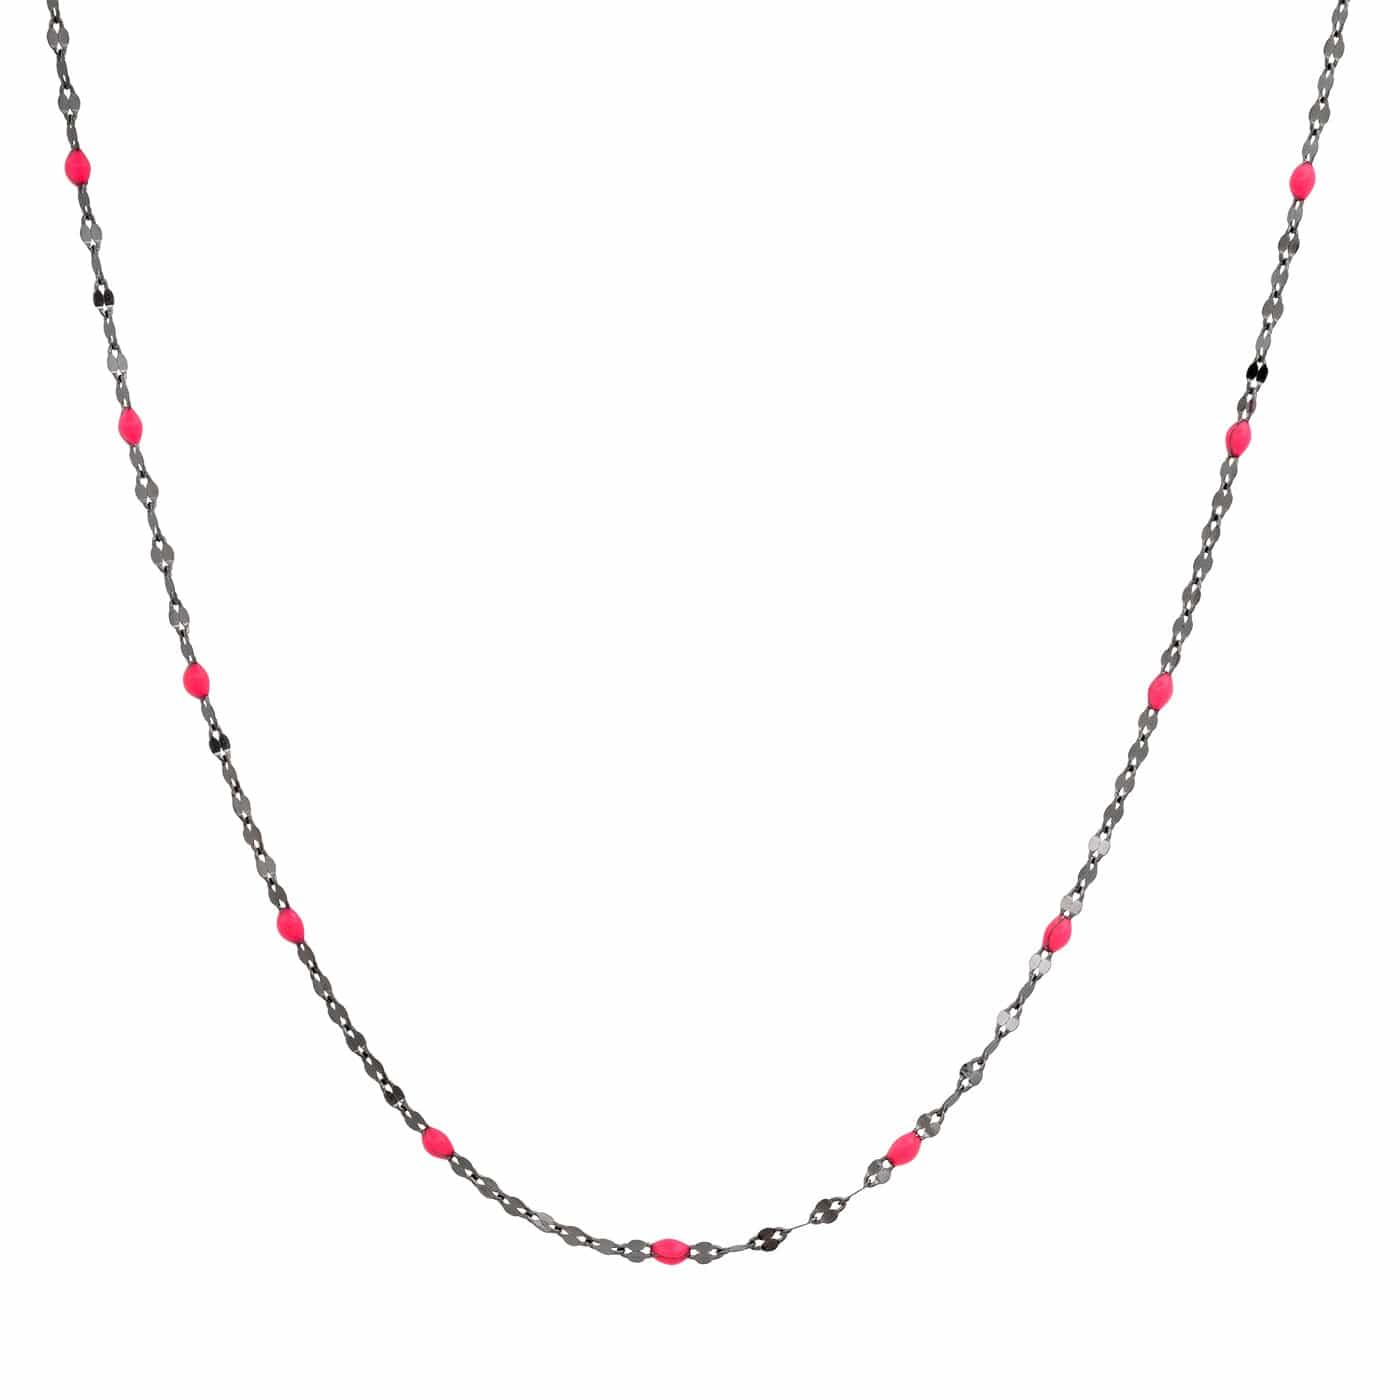 TAI JEWELRY Necklace Black/Neon Pink Gold Vermeil Sparkle Chain with Enamel Stations